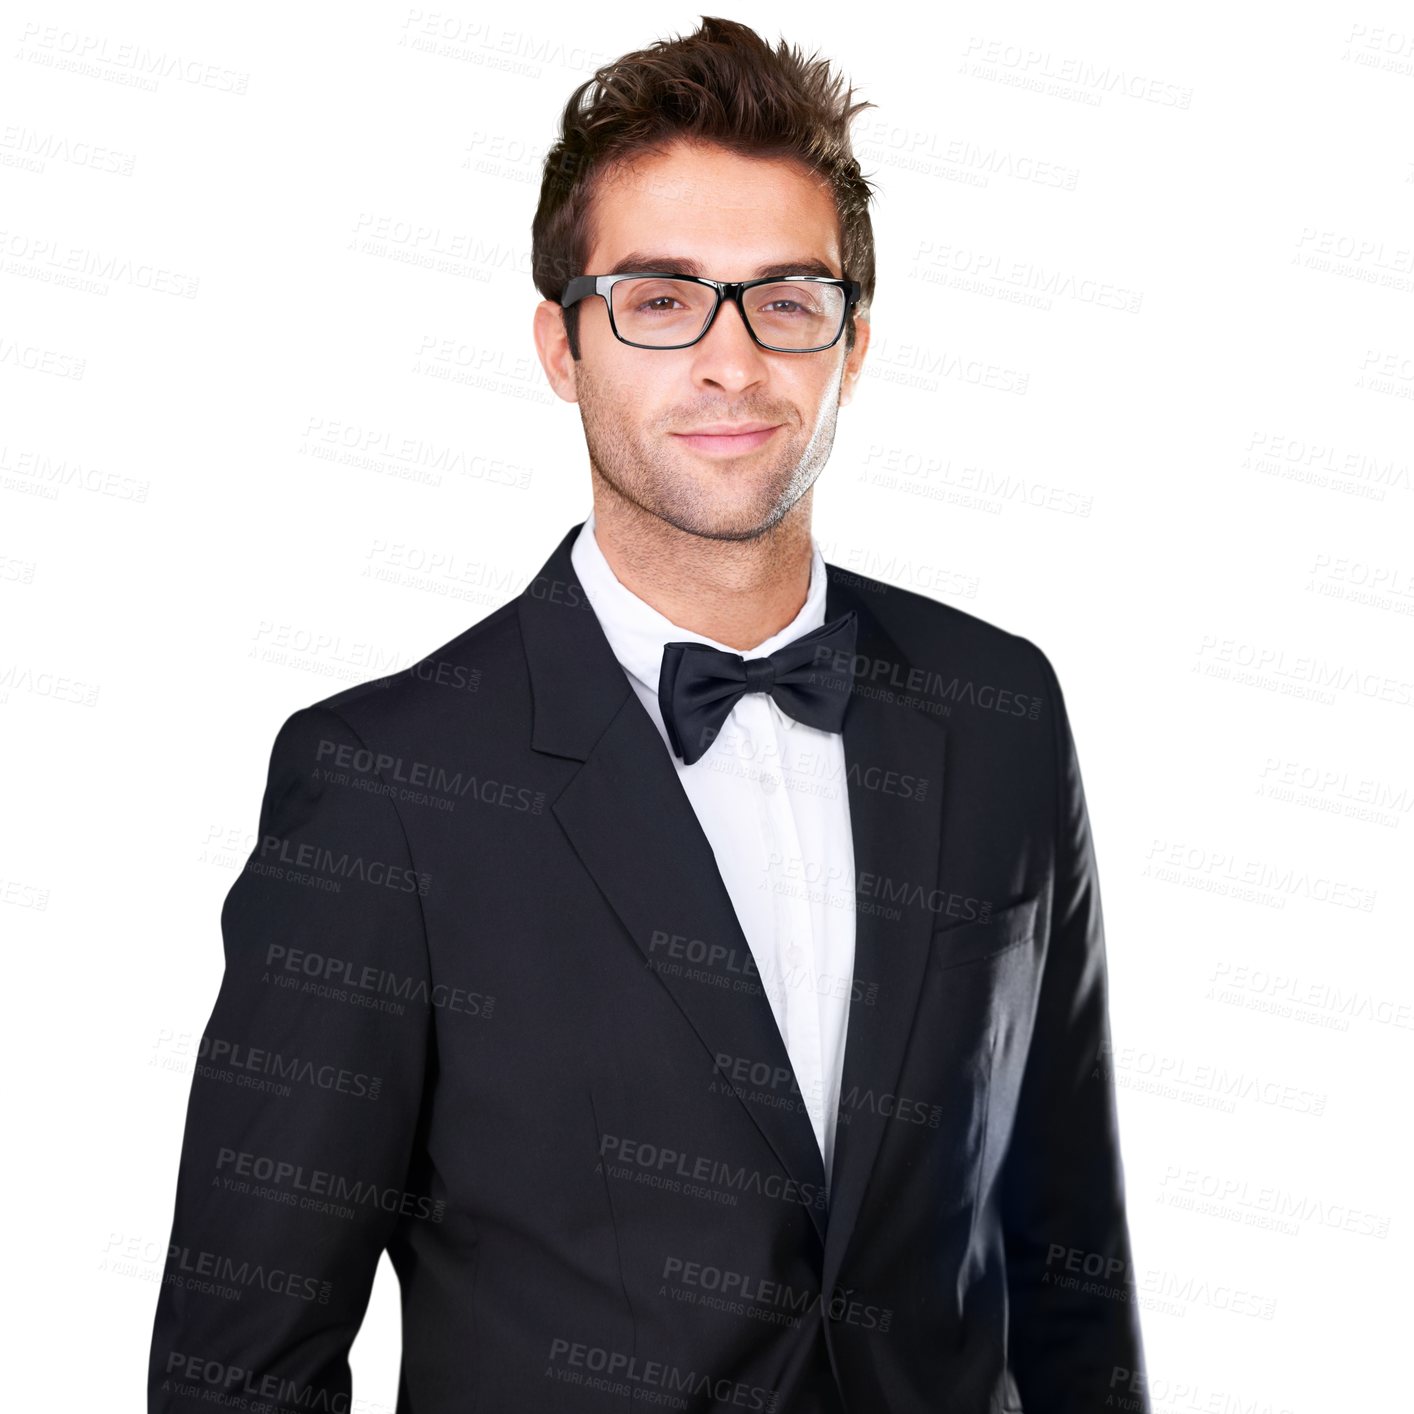 Buy stock photo Suit, tuxedo and fashion for a stylish man wearing elegant, rich and classy clothes on a png, transparent and isolated or mockup background. Portrait of an attractive, handsome and formal guy